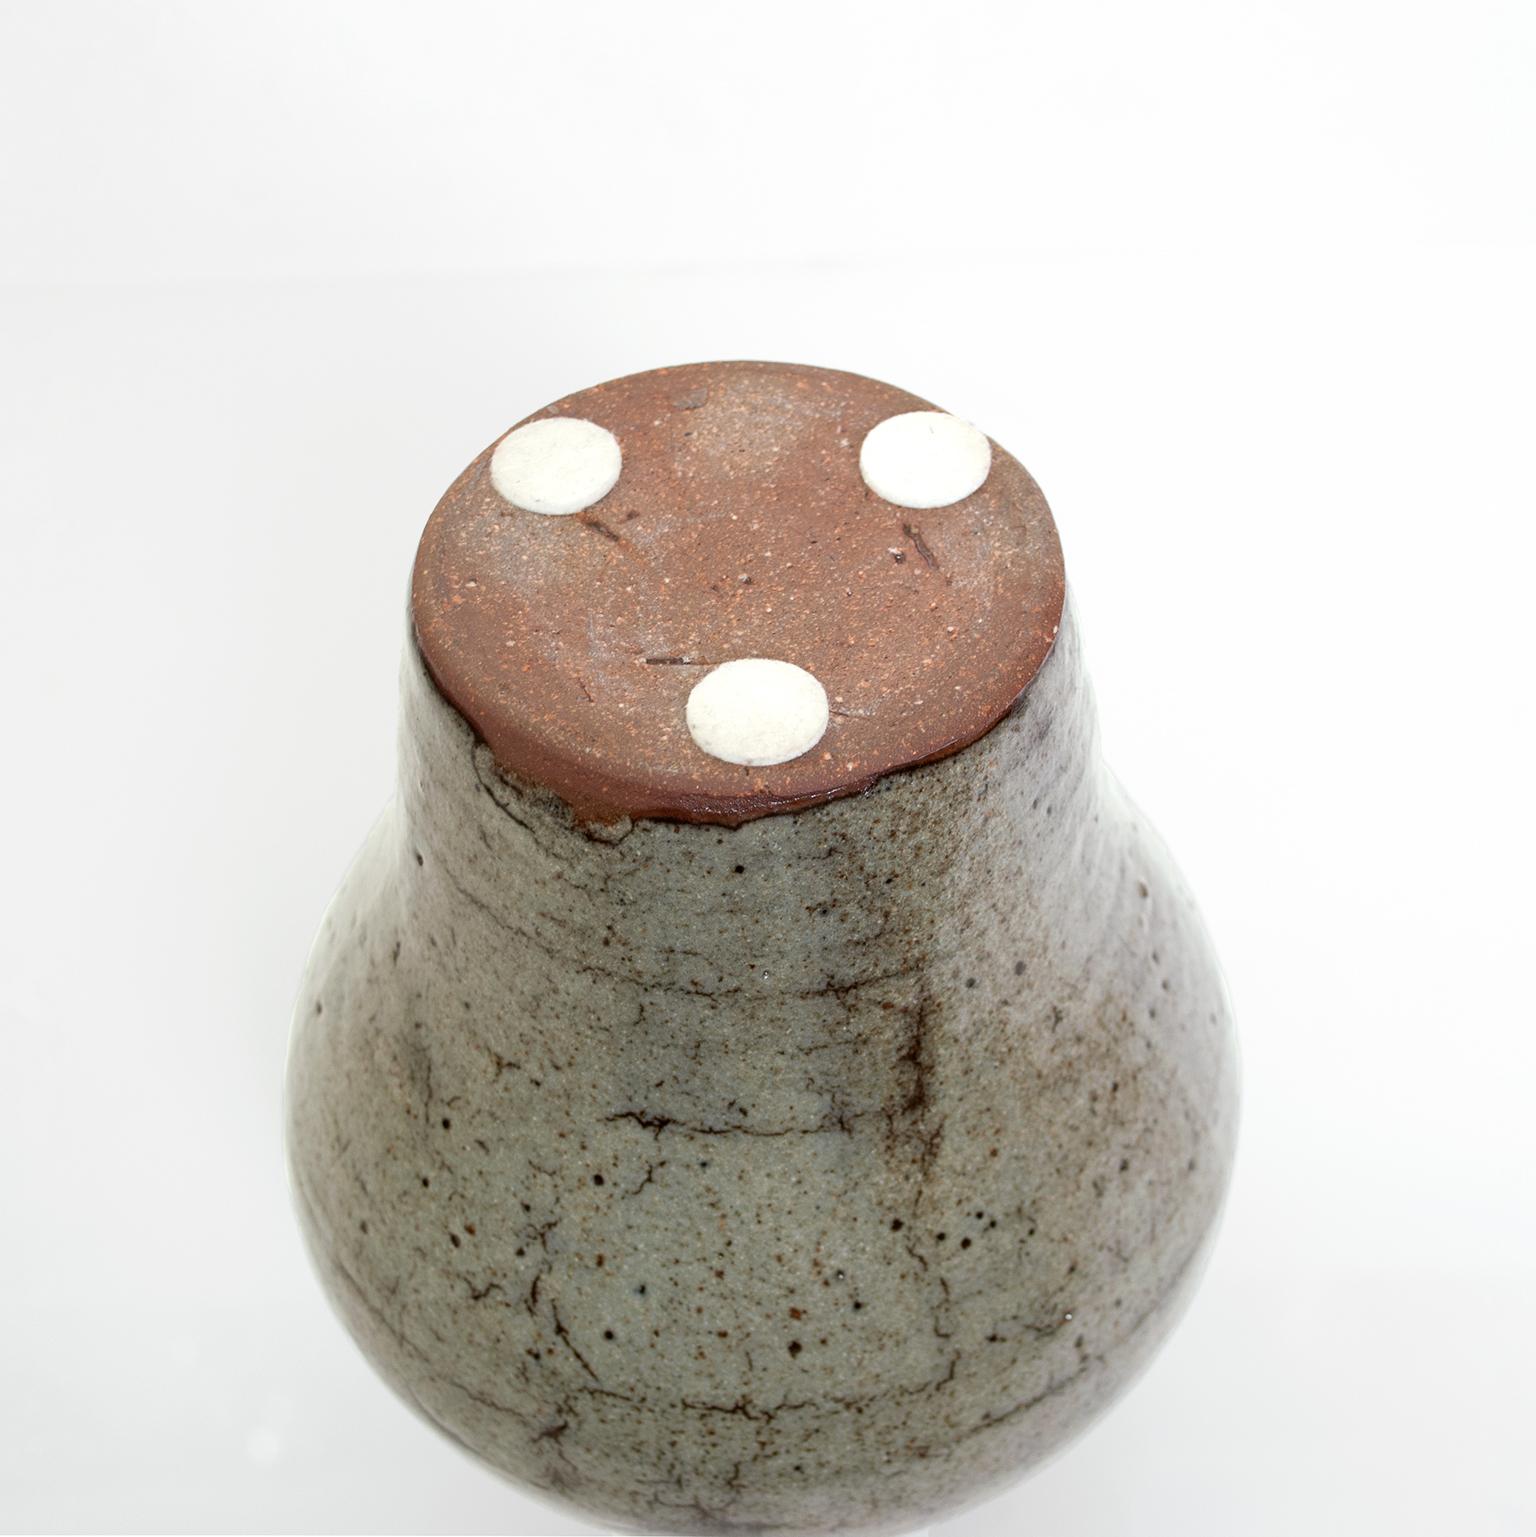 Mid-Century Modern Trevor Corser Ceramic Vase from The Leach Pottery, St. Ives, England